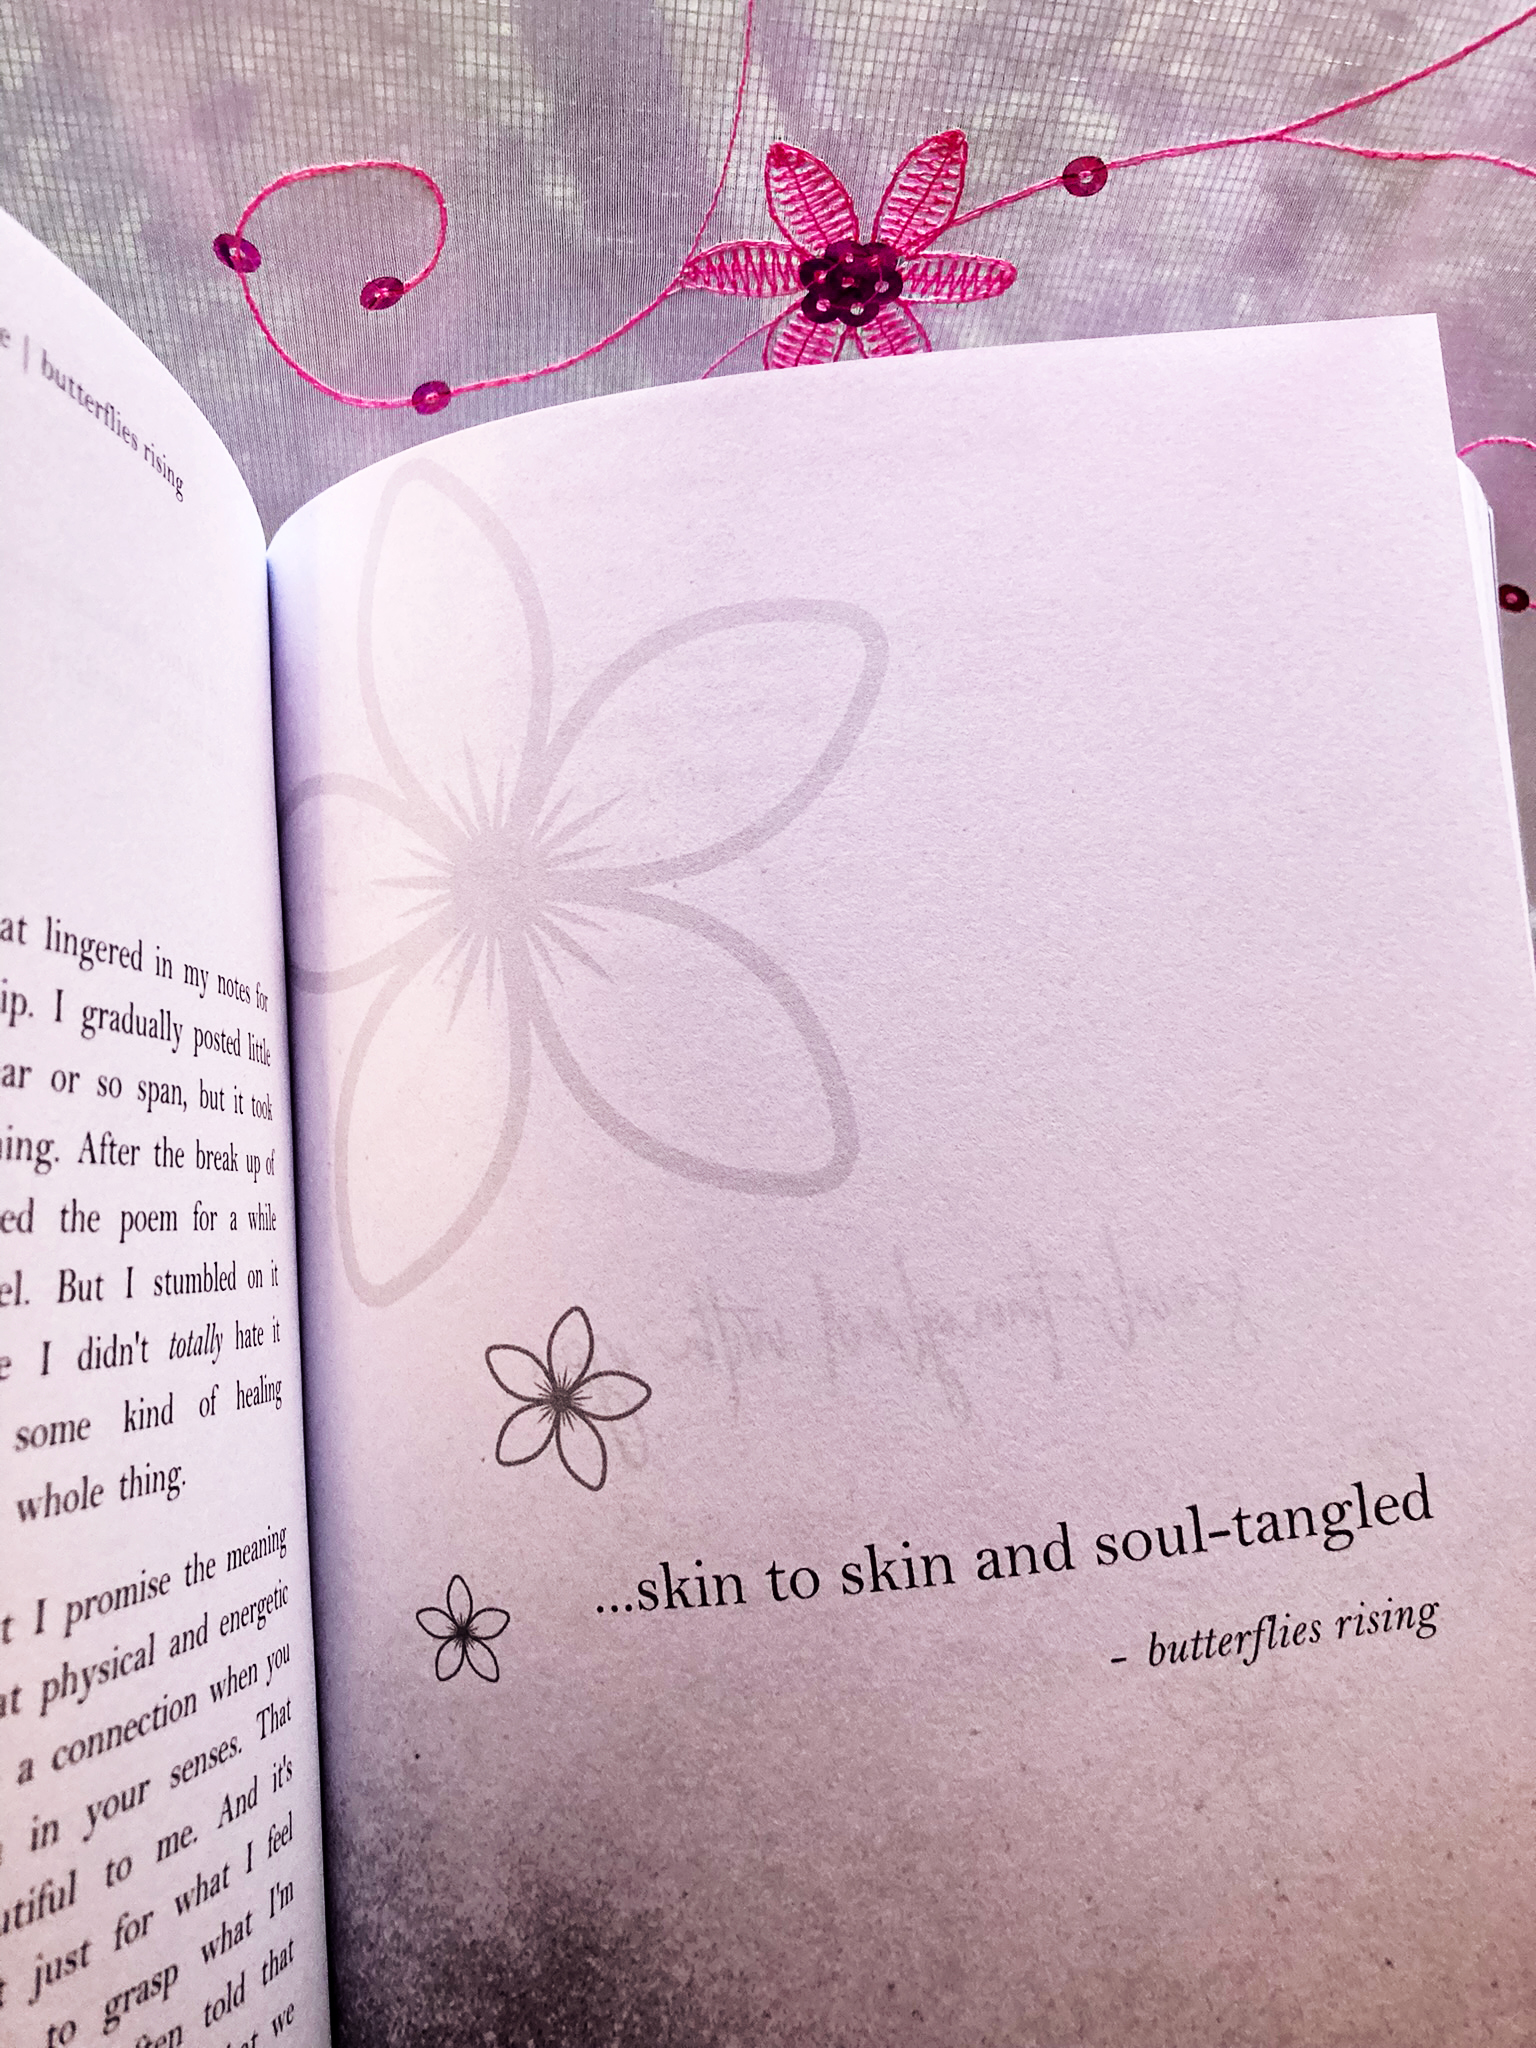 skin to skin and soul-tangled - butterflies rising quote